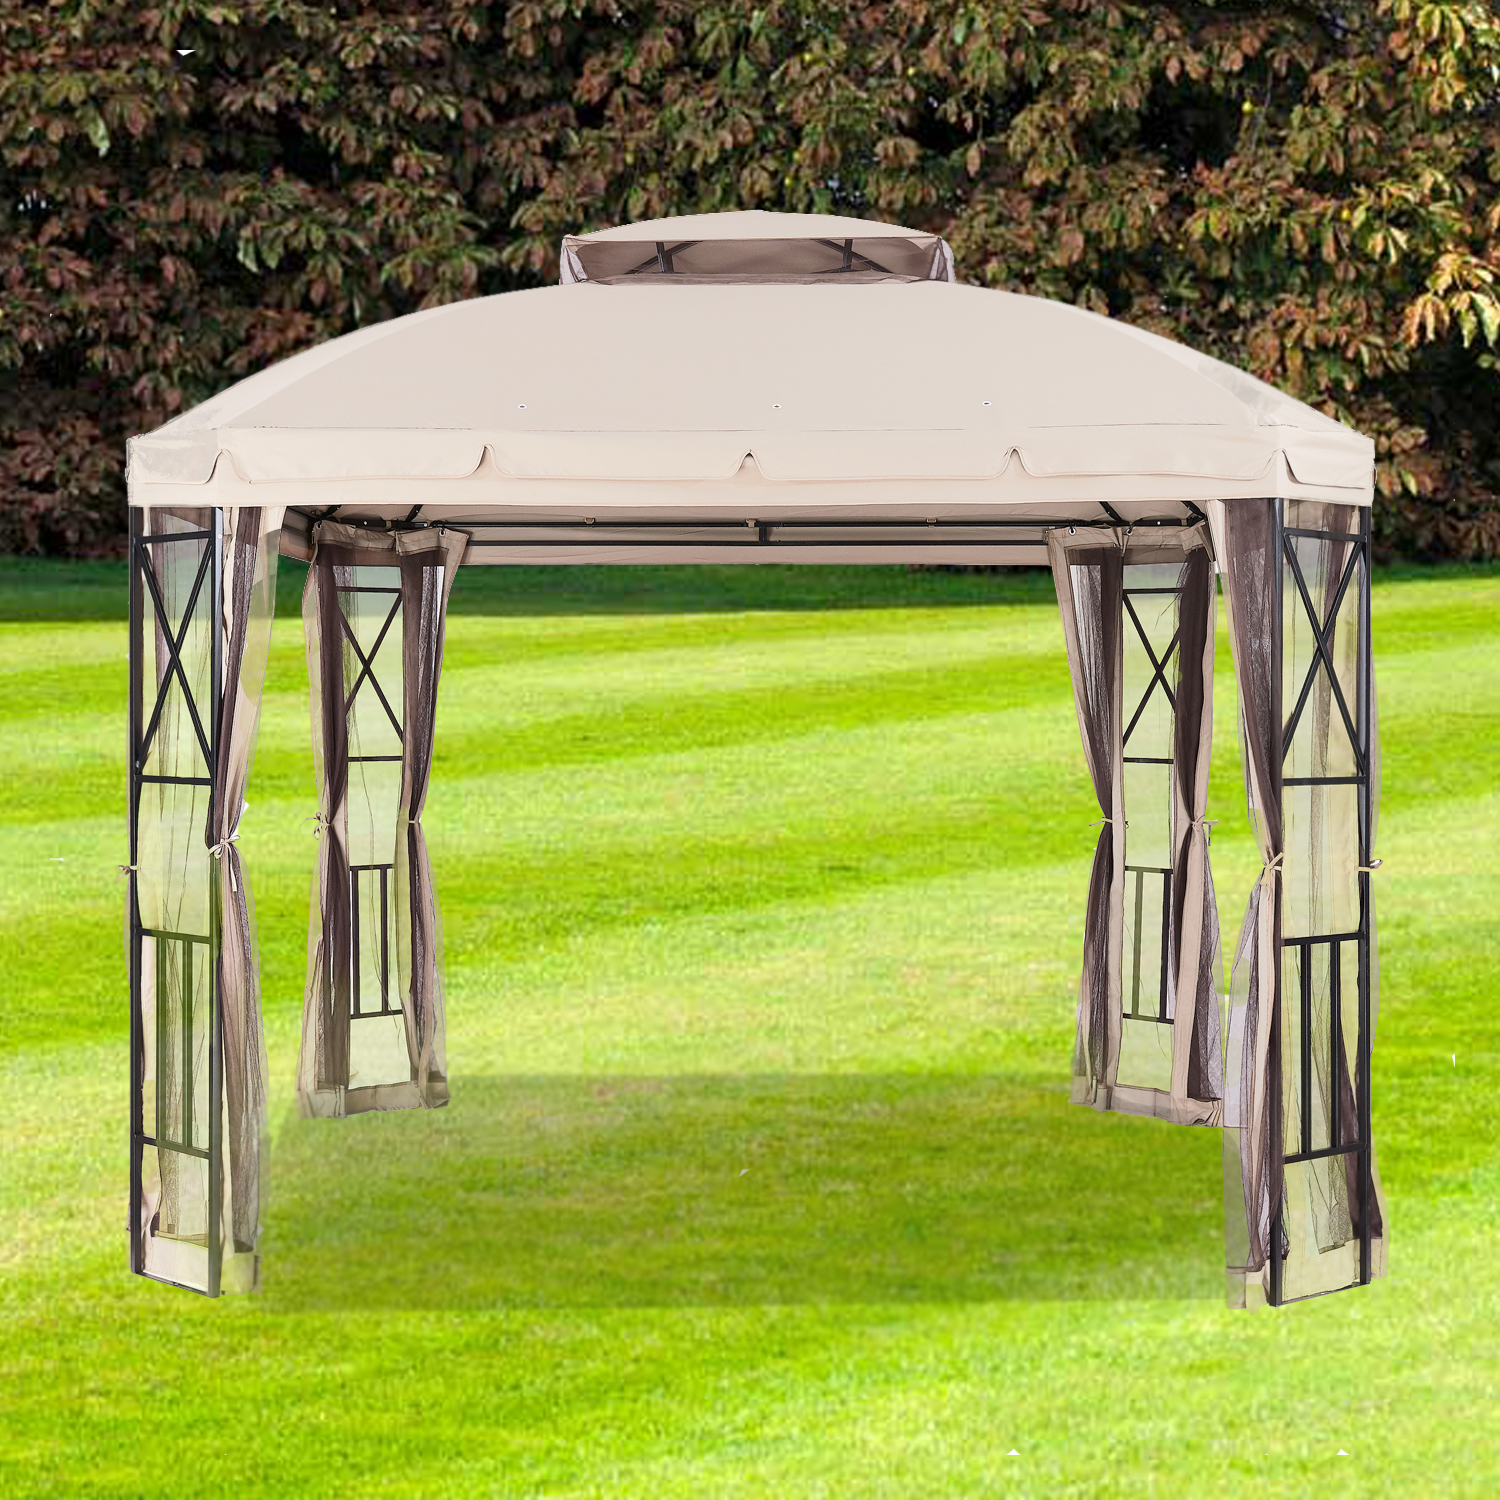 Replacement Canopy for Alton Heights Gazebo - Riplock 350